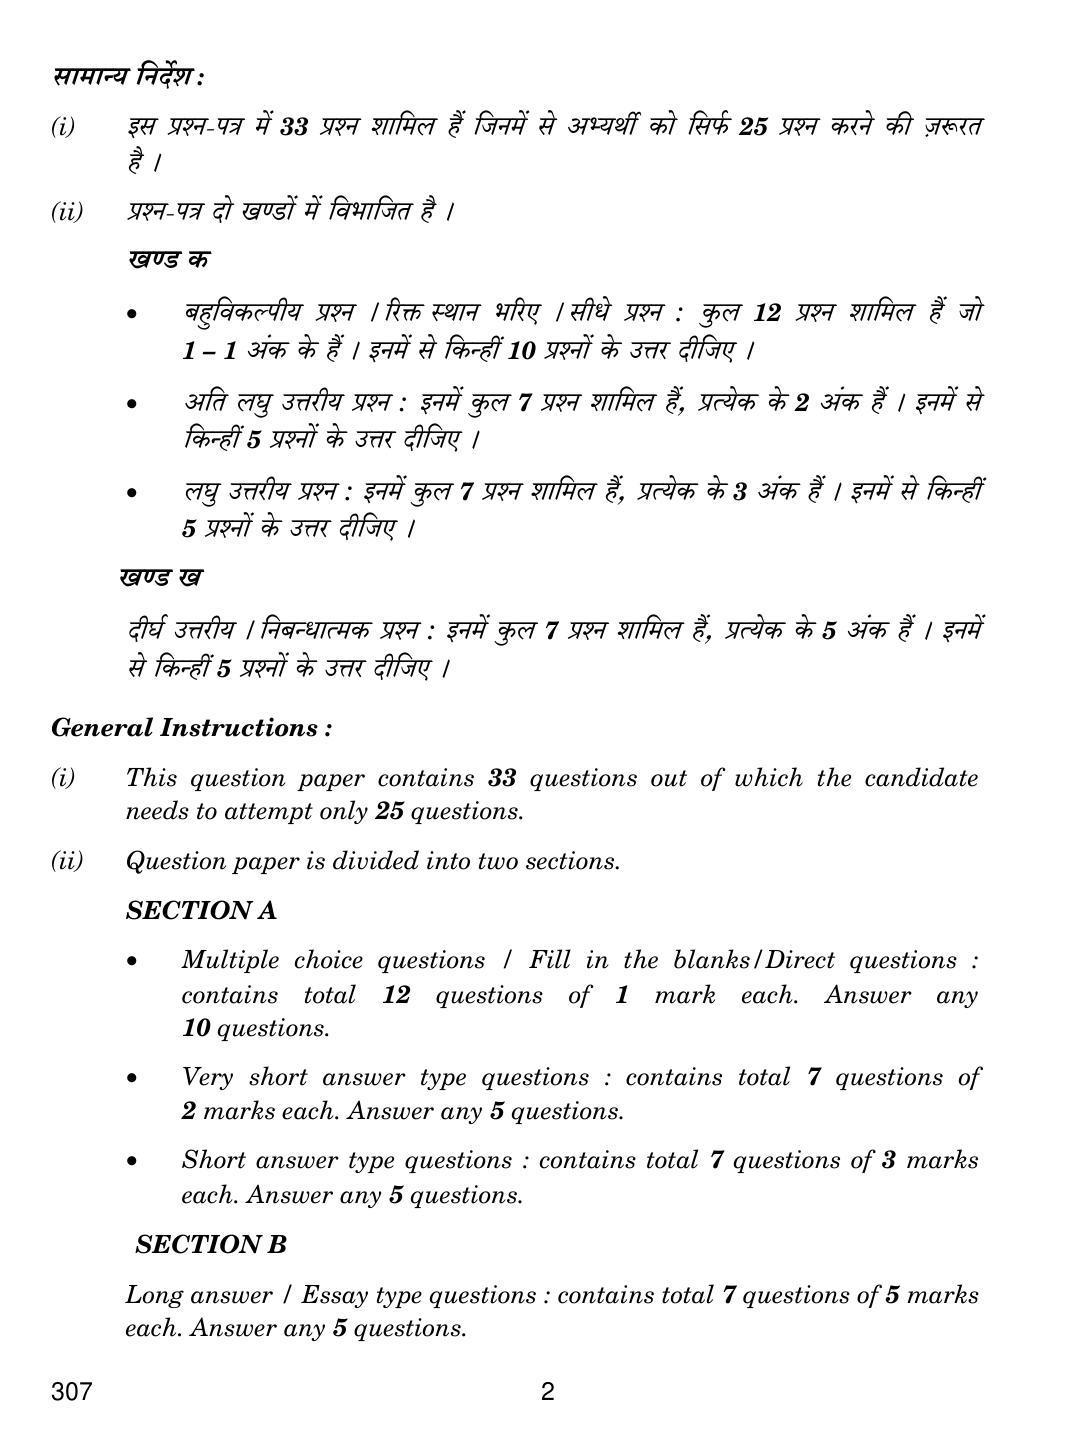 CBSE Class 12 307 Marketing 2019 Question Paper - Page 2